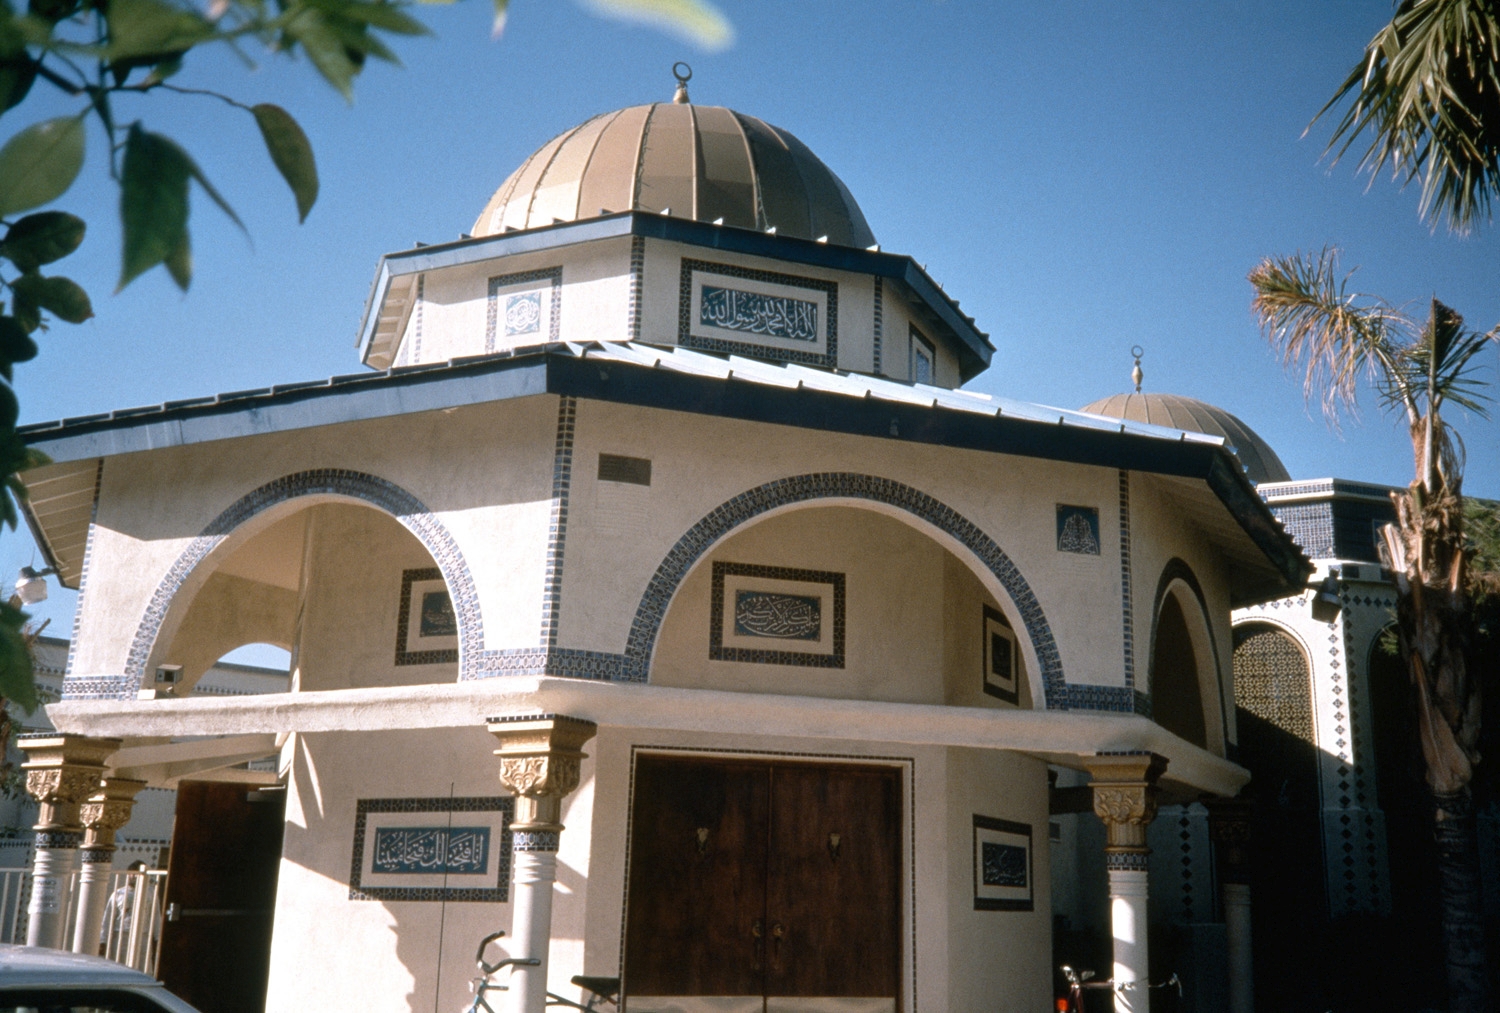 Islamic Community Center of Tempe - Exterior view, showing octagonal shape